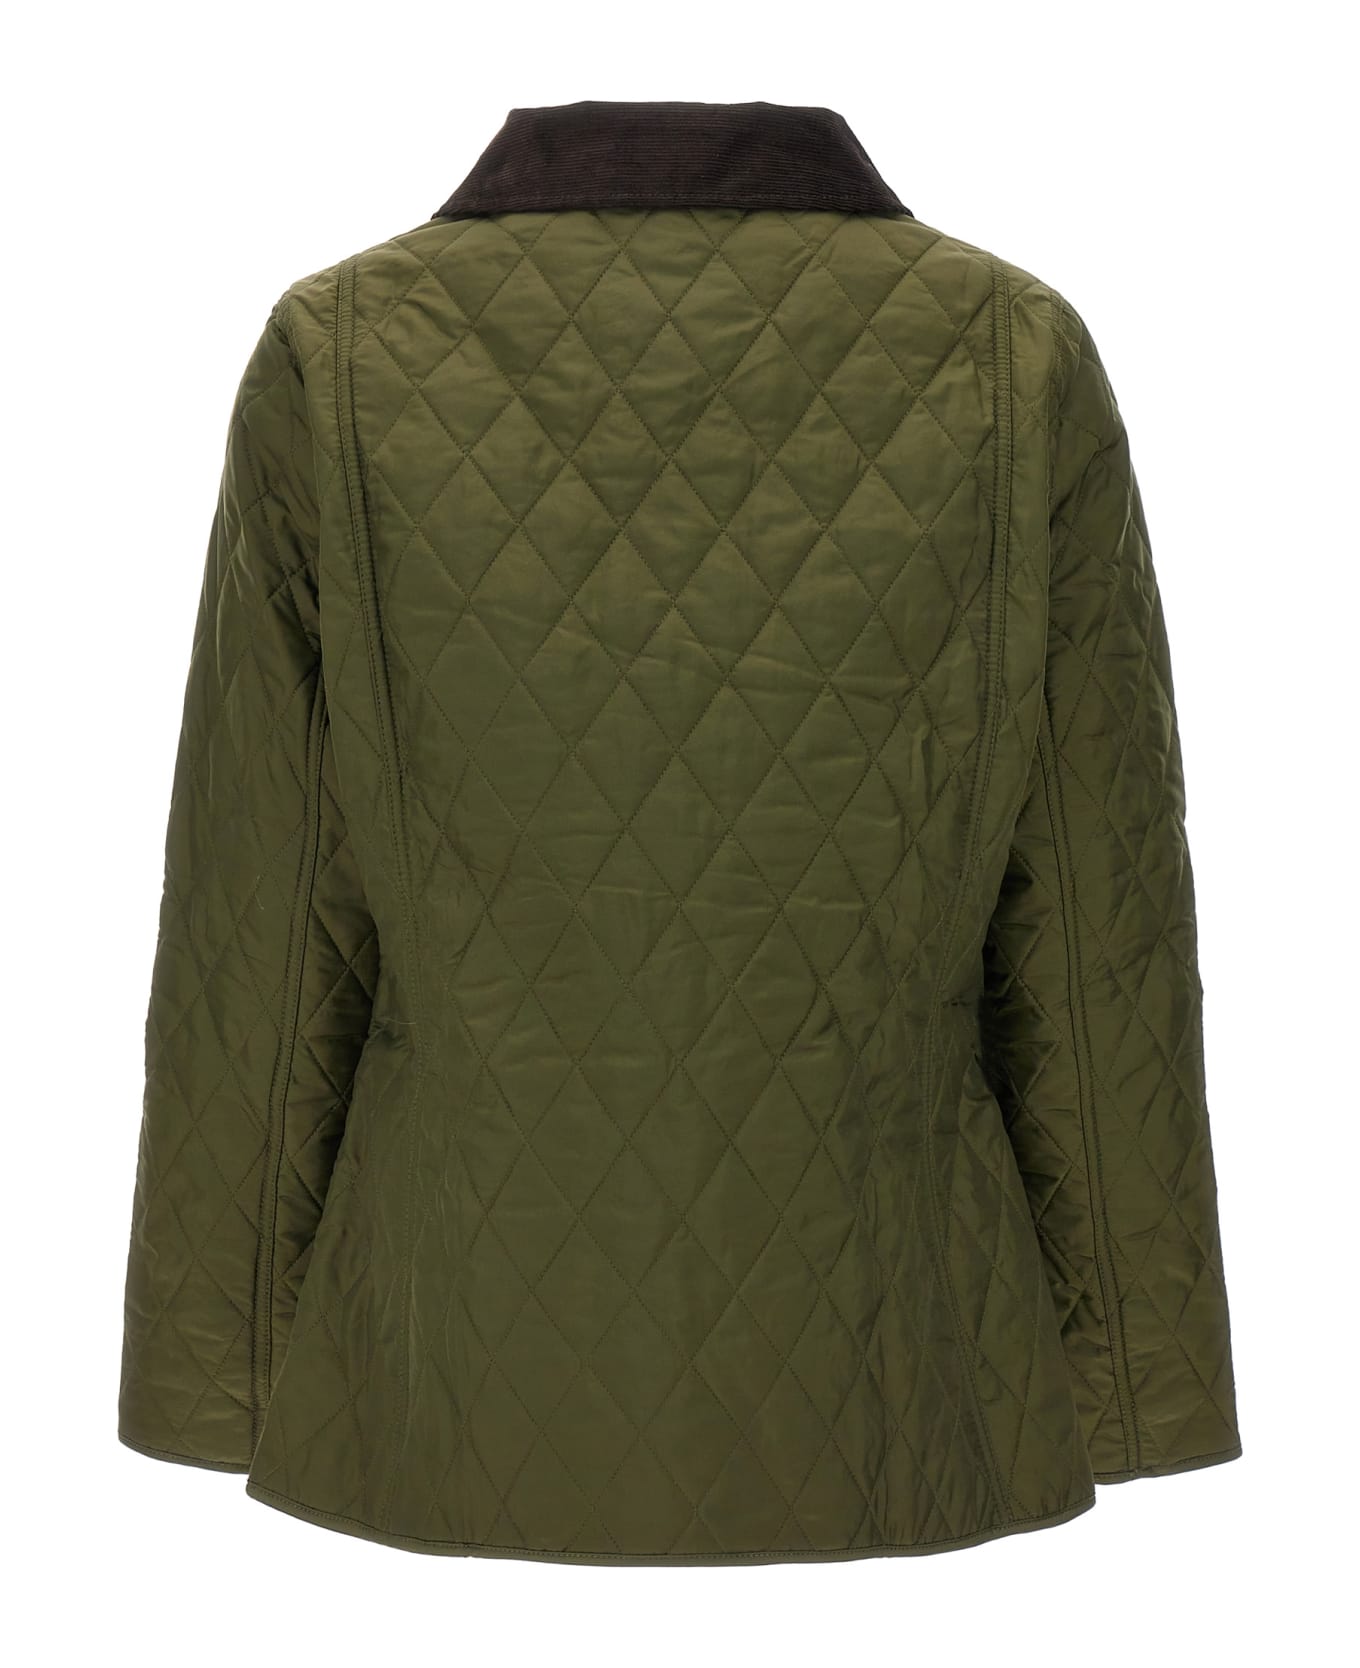 Barbour 'annandale' Jacket - Green ダウンジャケット